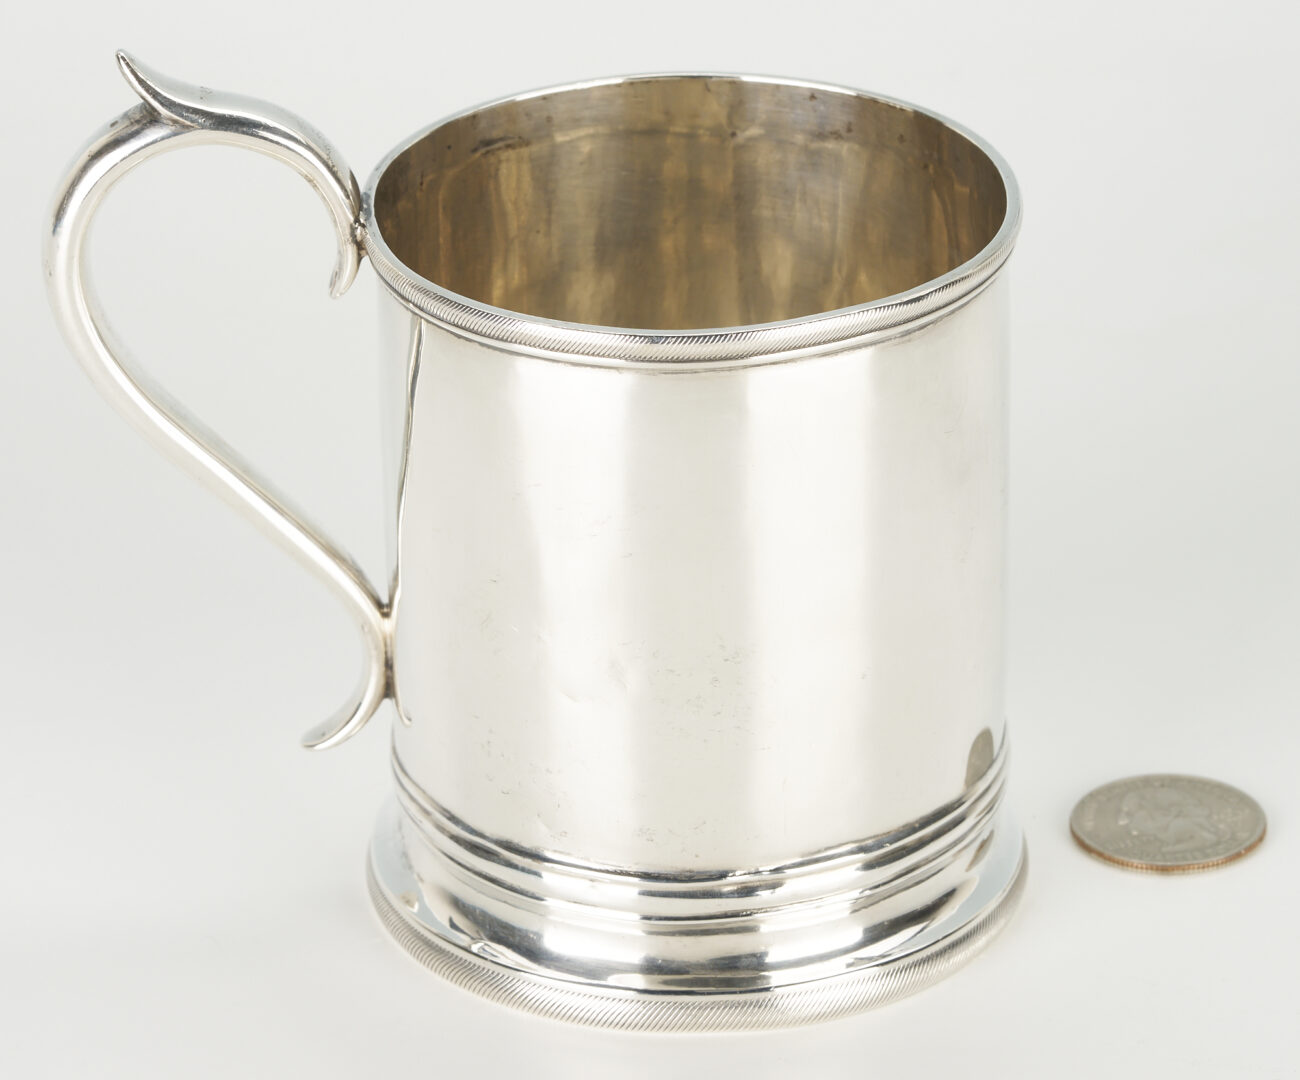 Lot 73: New Orleans coin silver mug, Dillon and Hovel